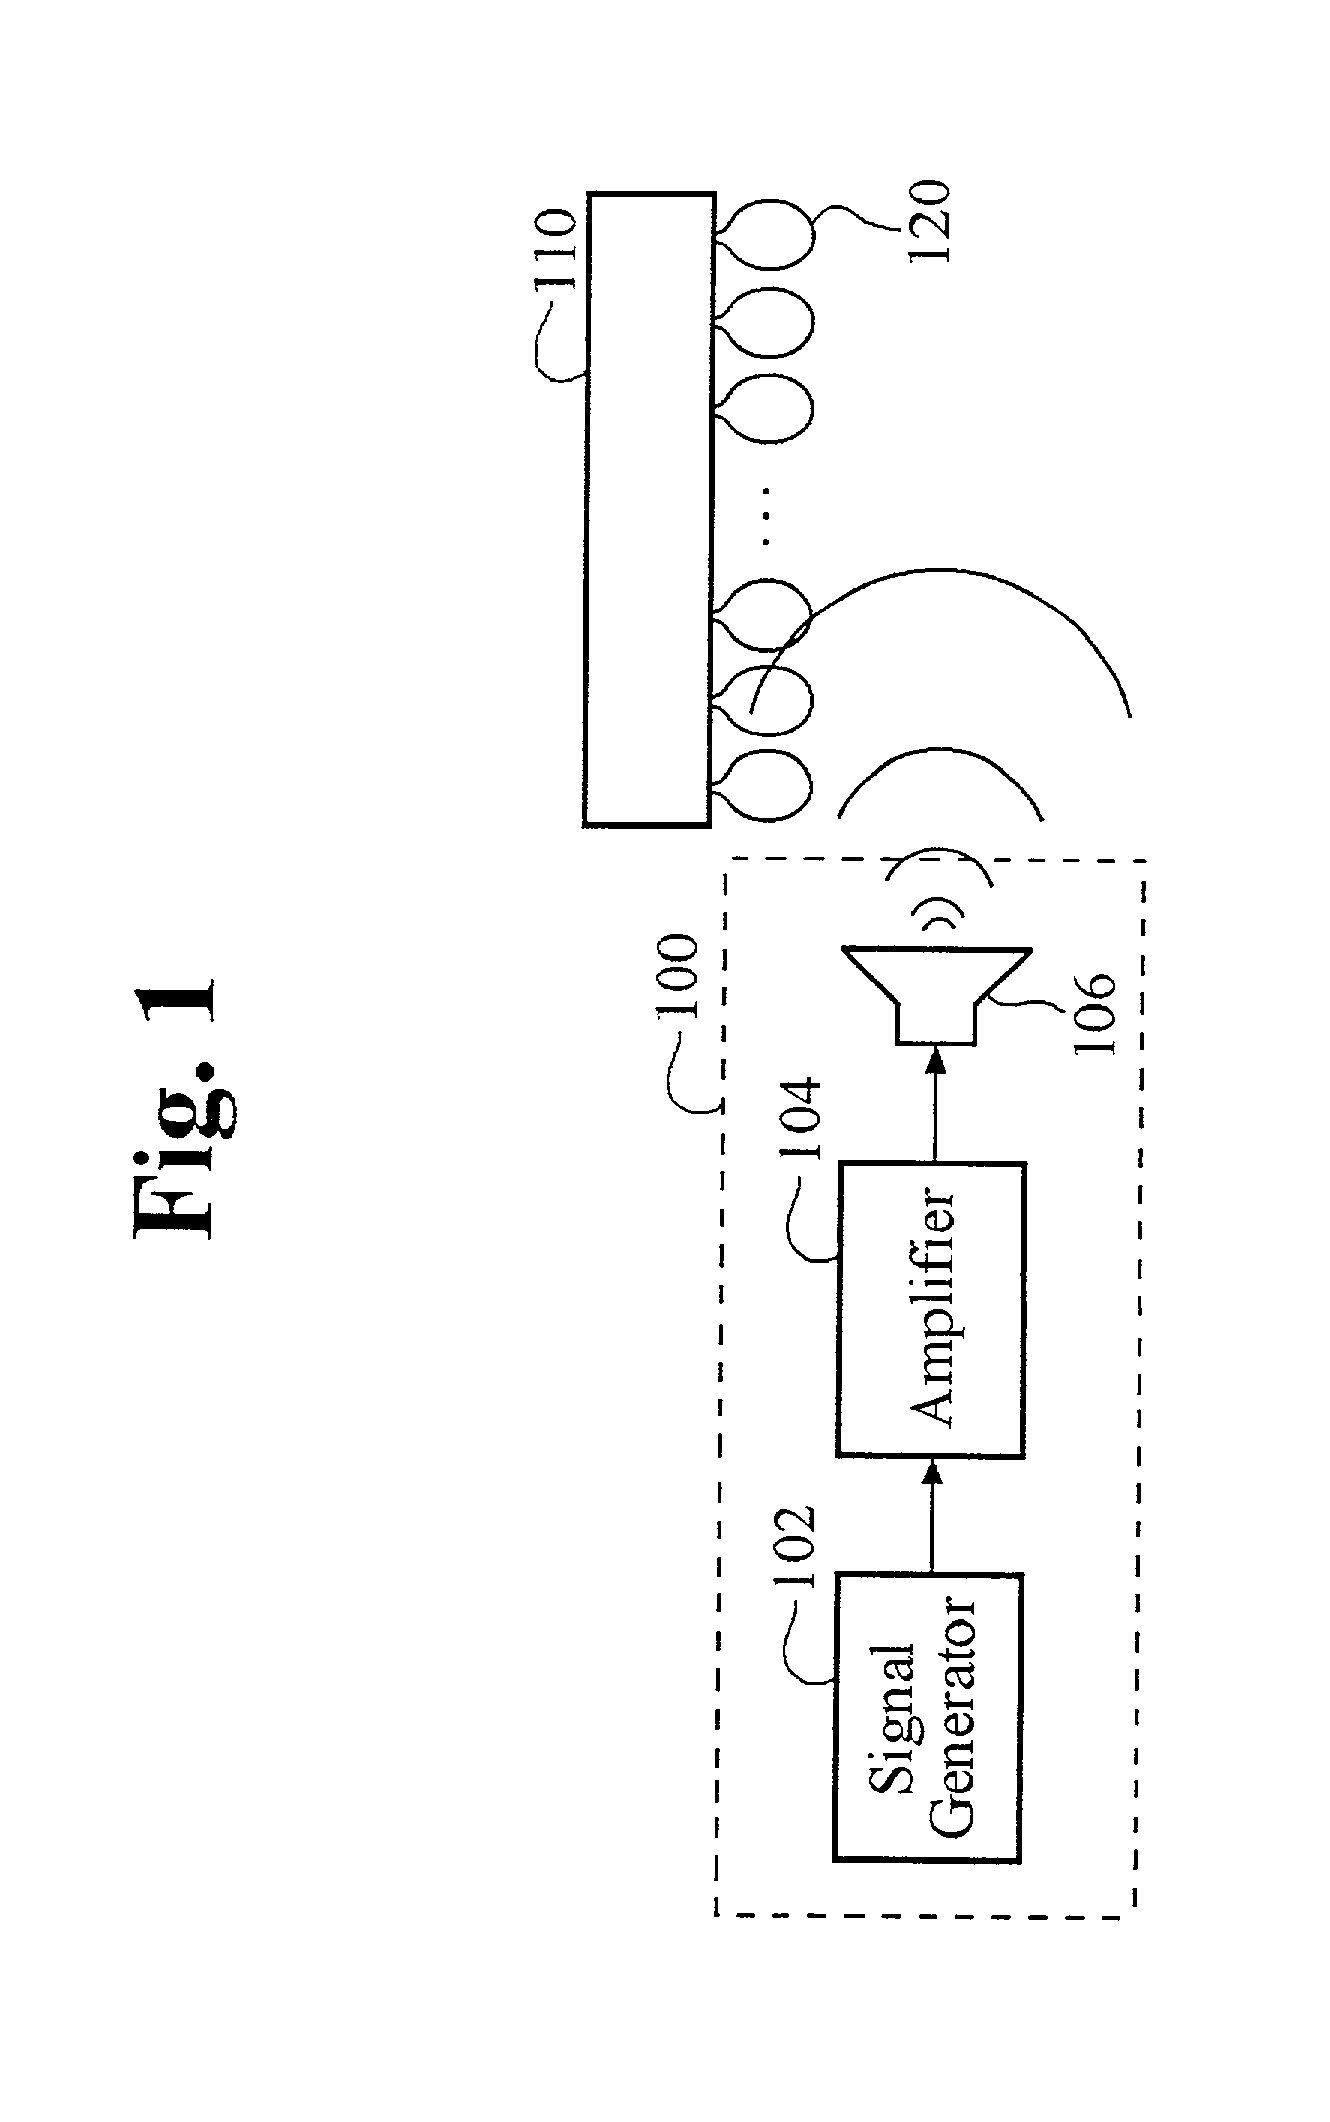 Apparatus for enhancing condensation and boiling of a fluid